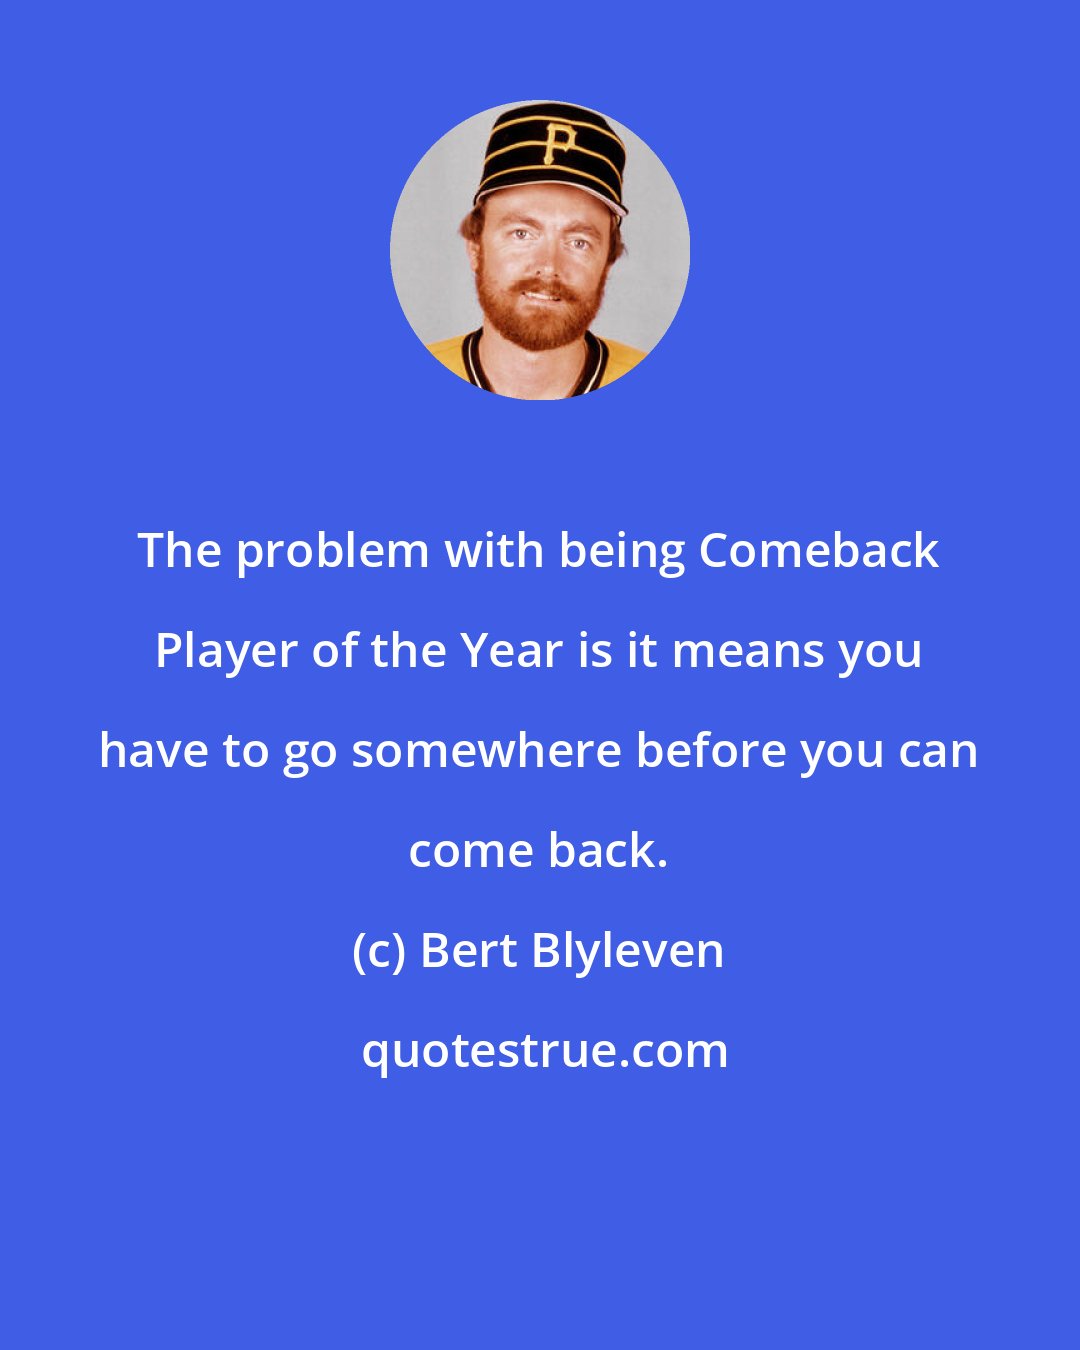 Bert Blyleven: The problem with being Comeback Player of the Year is it means you have to go somewhere before you can come back.